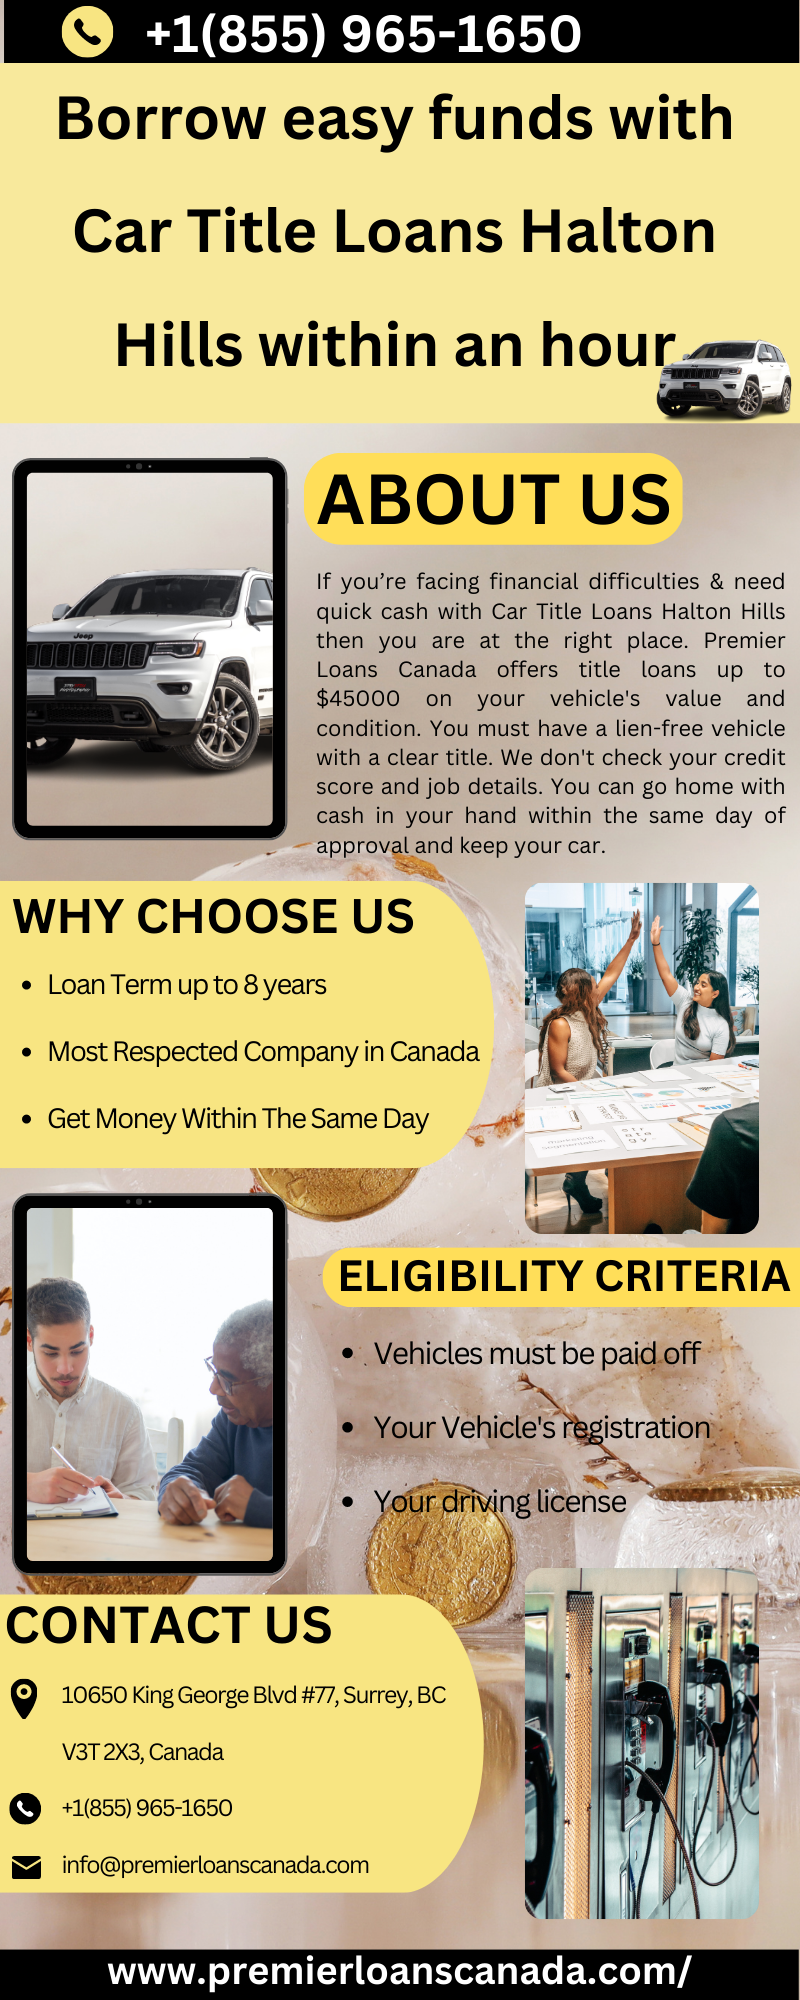 Borrow easy funds with Car Title Loans Halton Hills within an hour